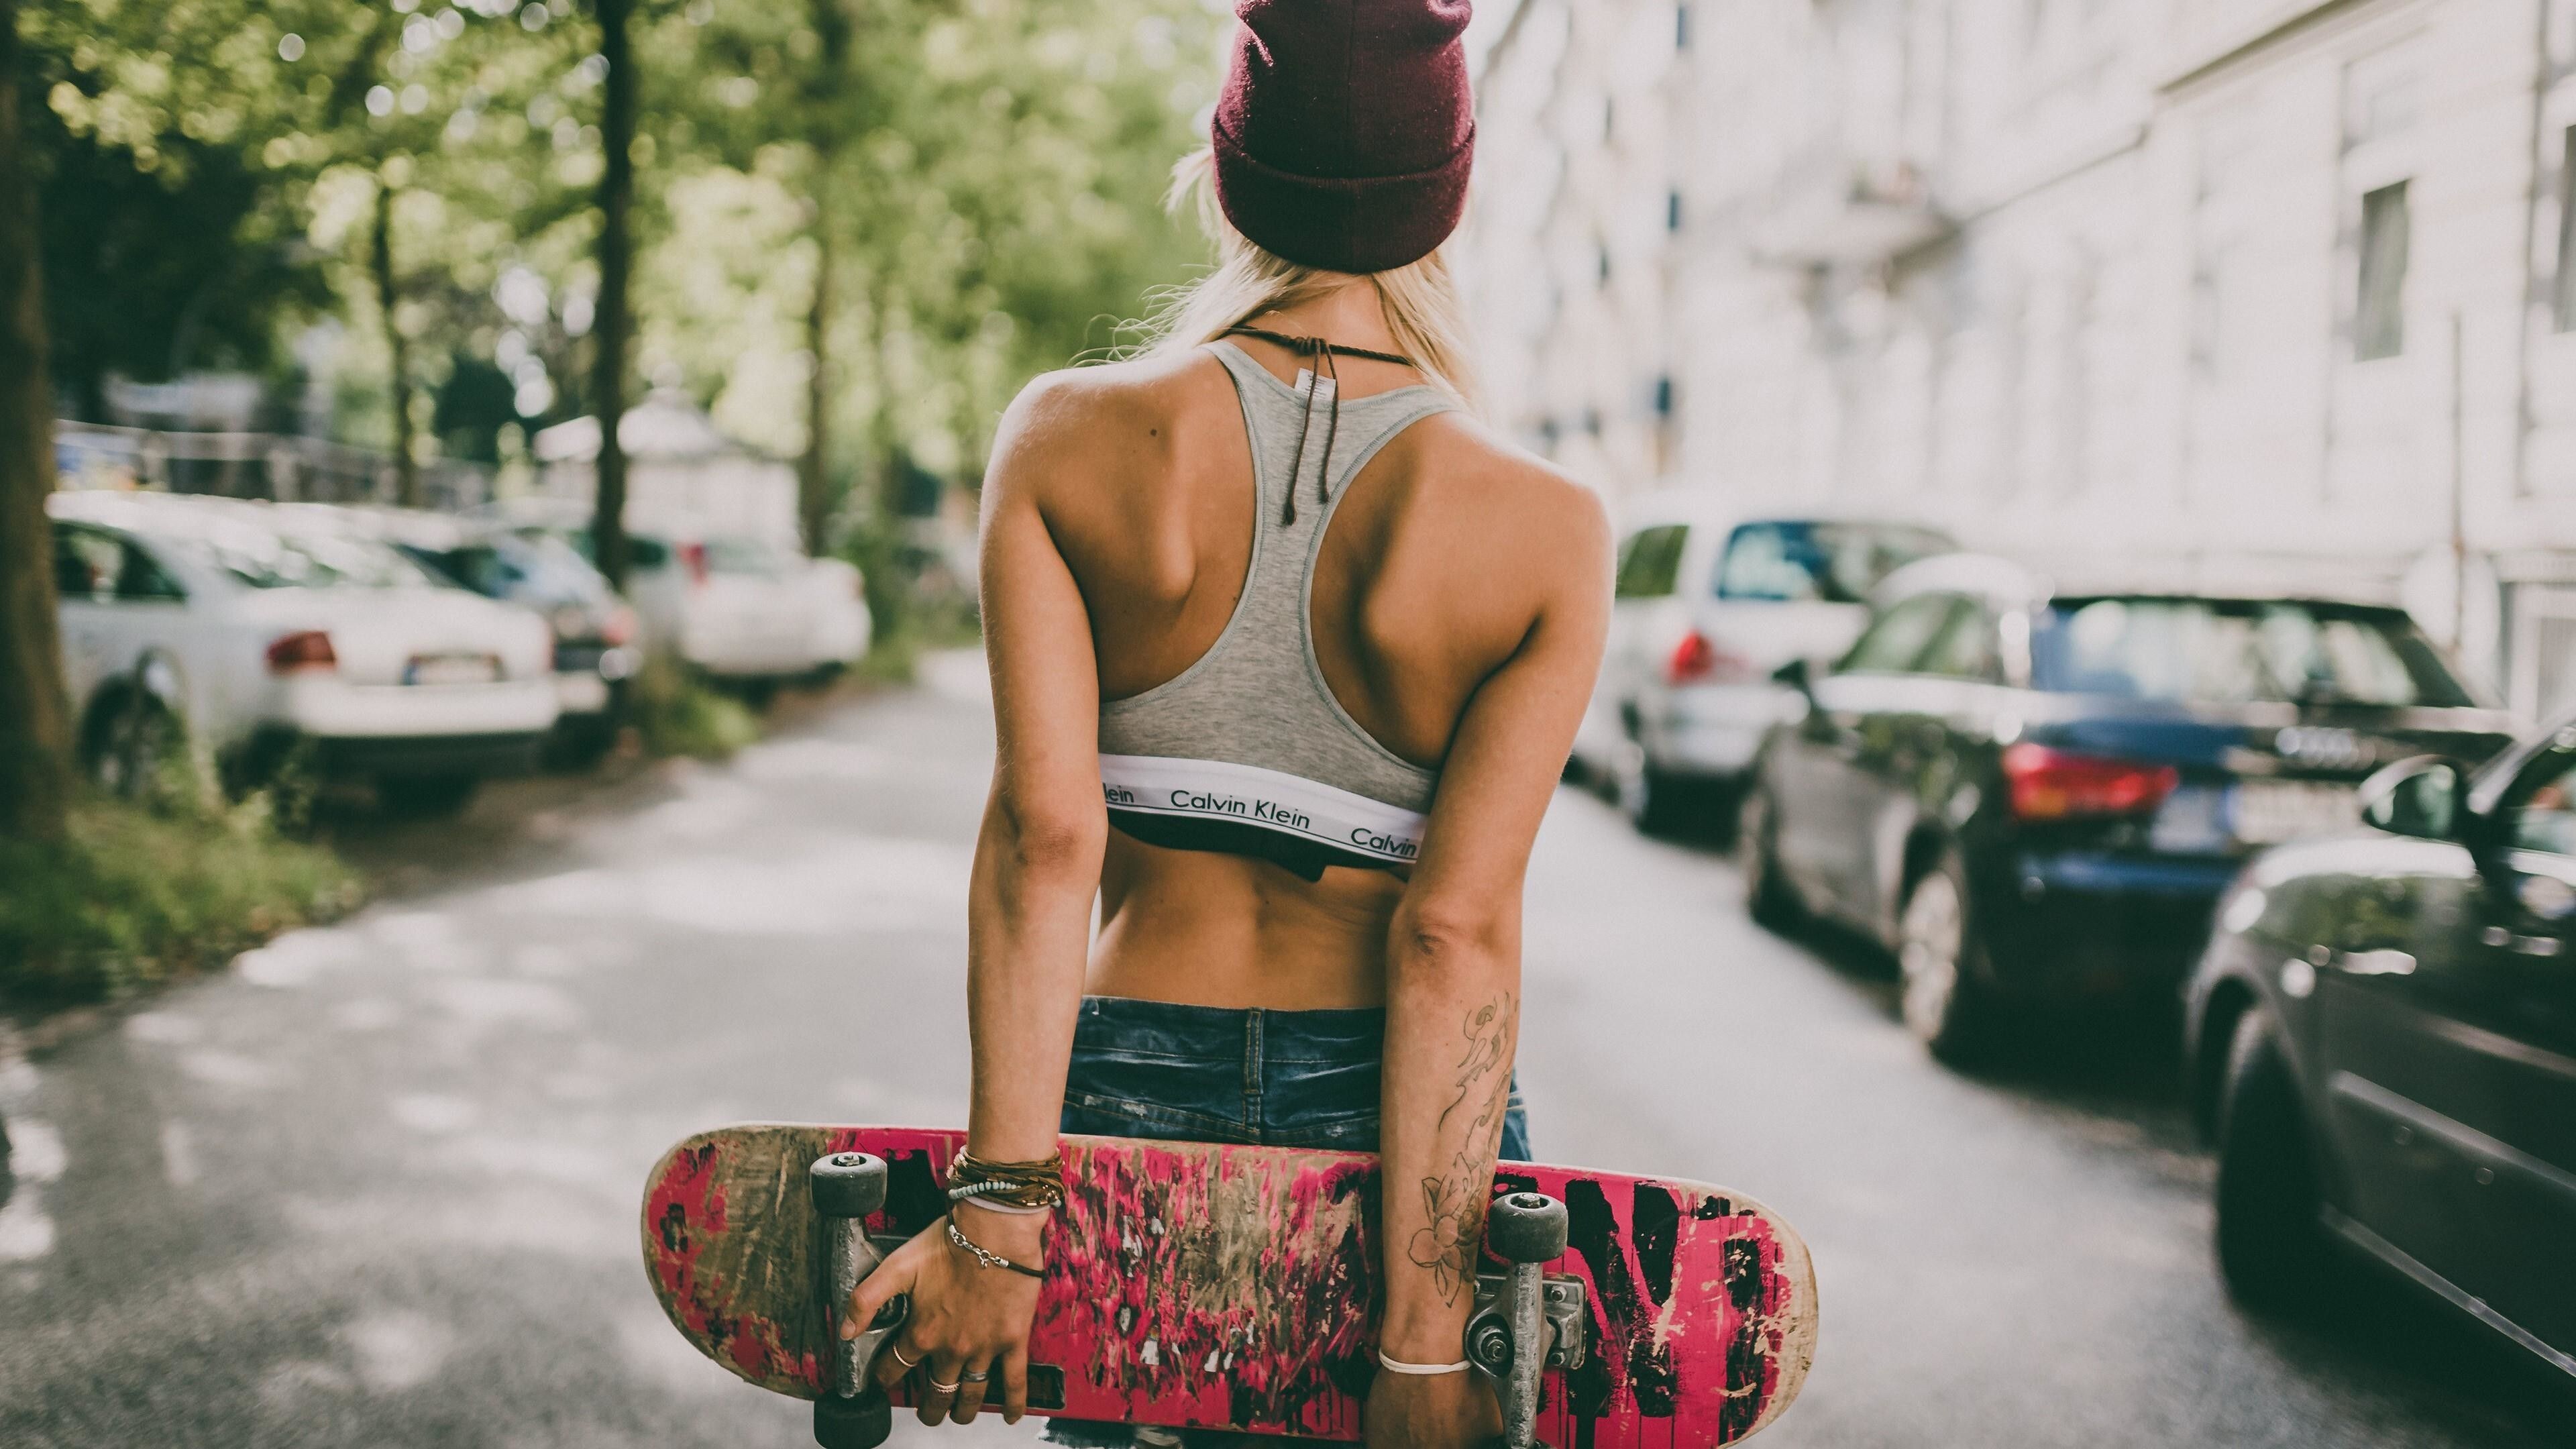 Girl Skateboarding: An action sport, Originating in the United States, Recreational activity. 3840x2160 4K Wallpaper.